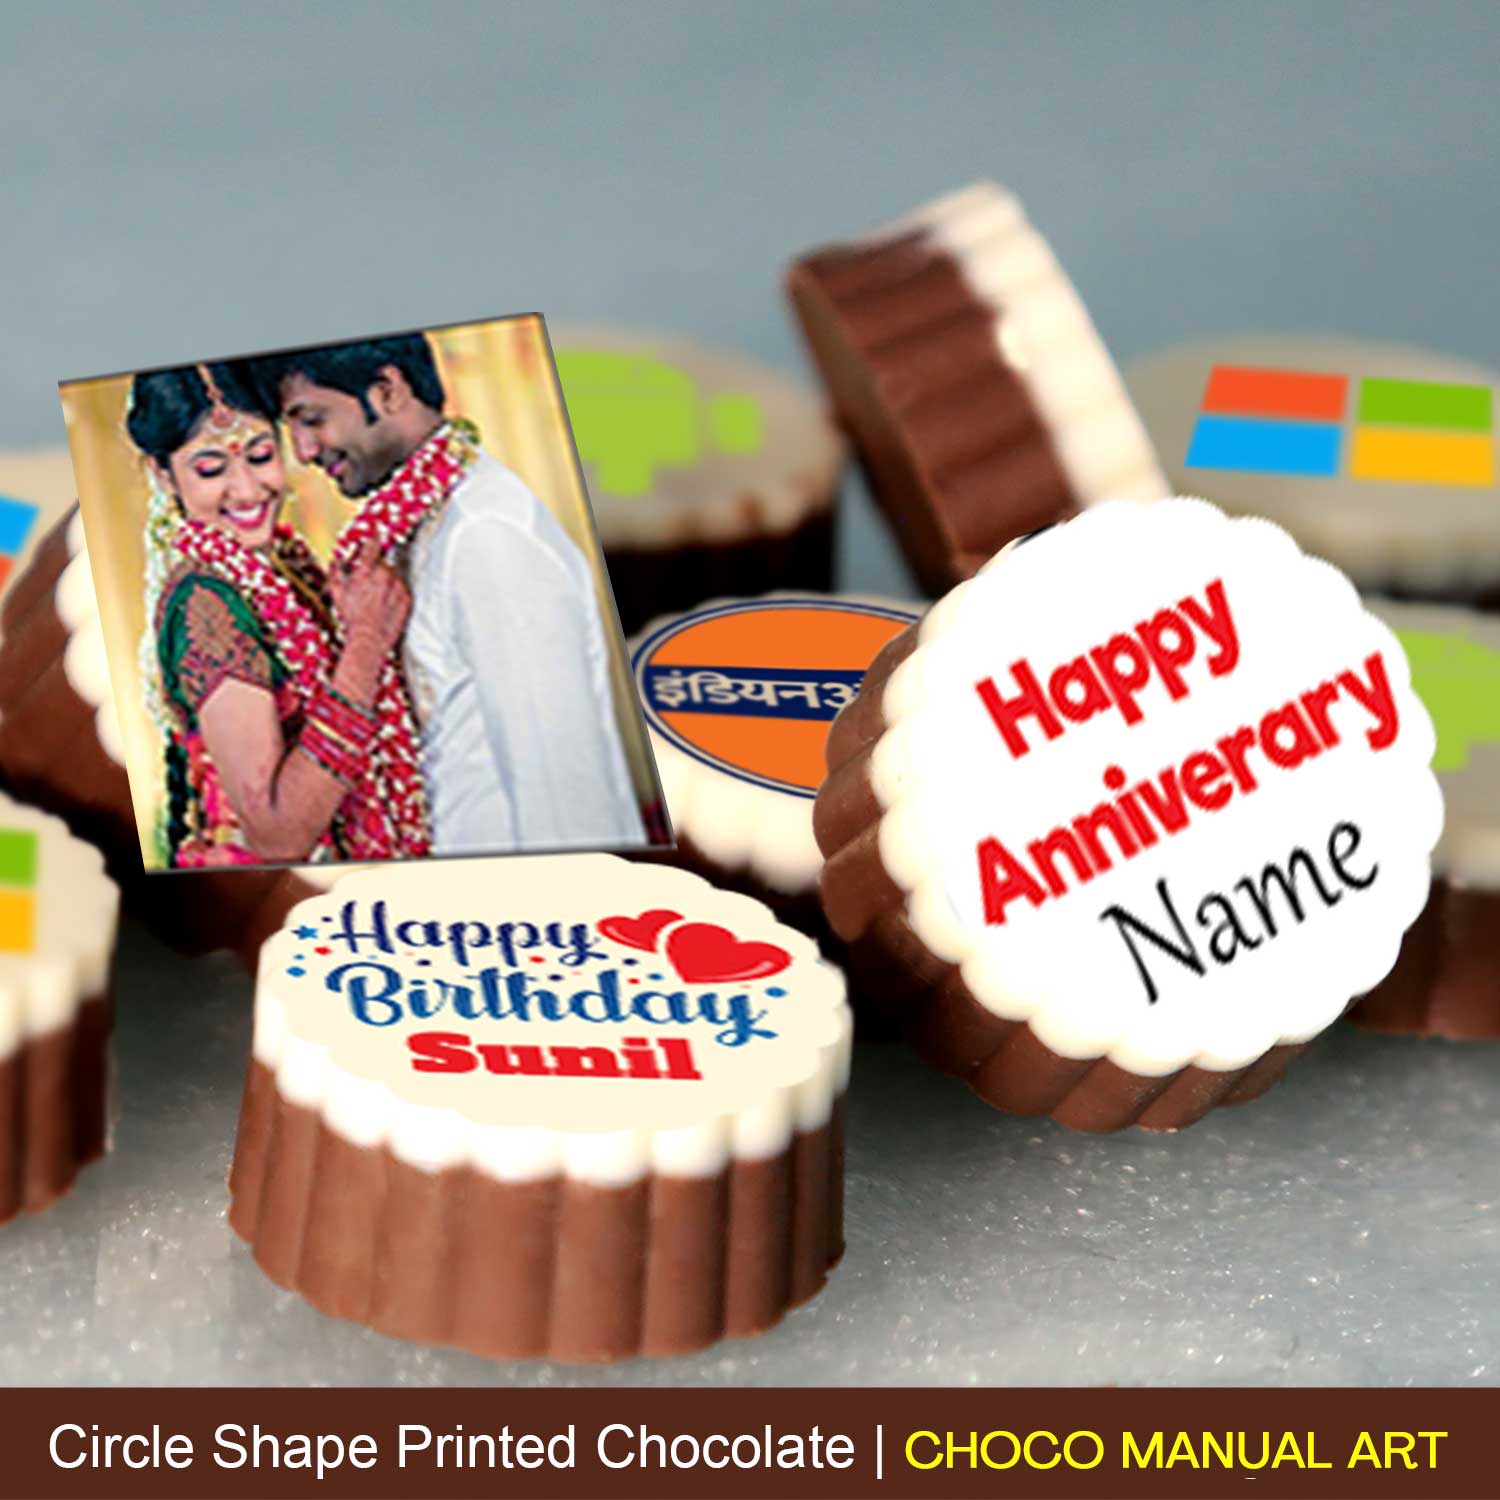 Couple's name printed chocolates with customised gift box